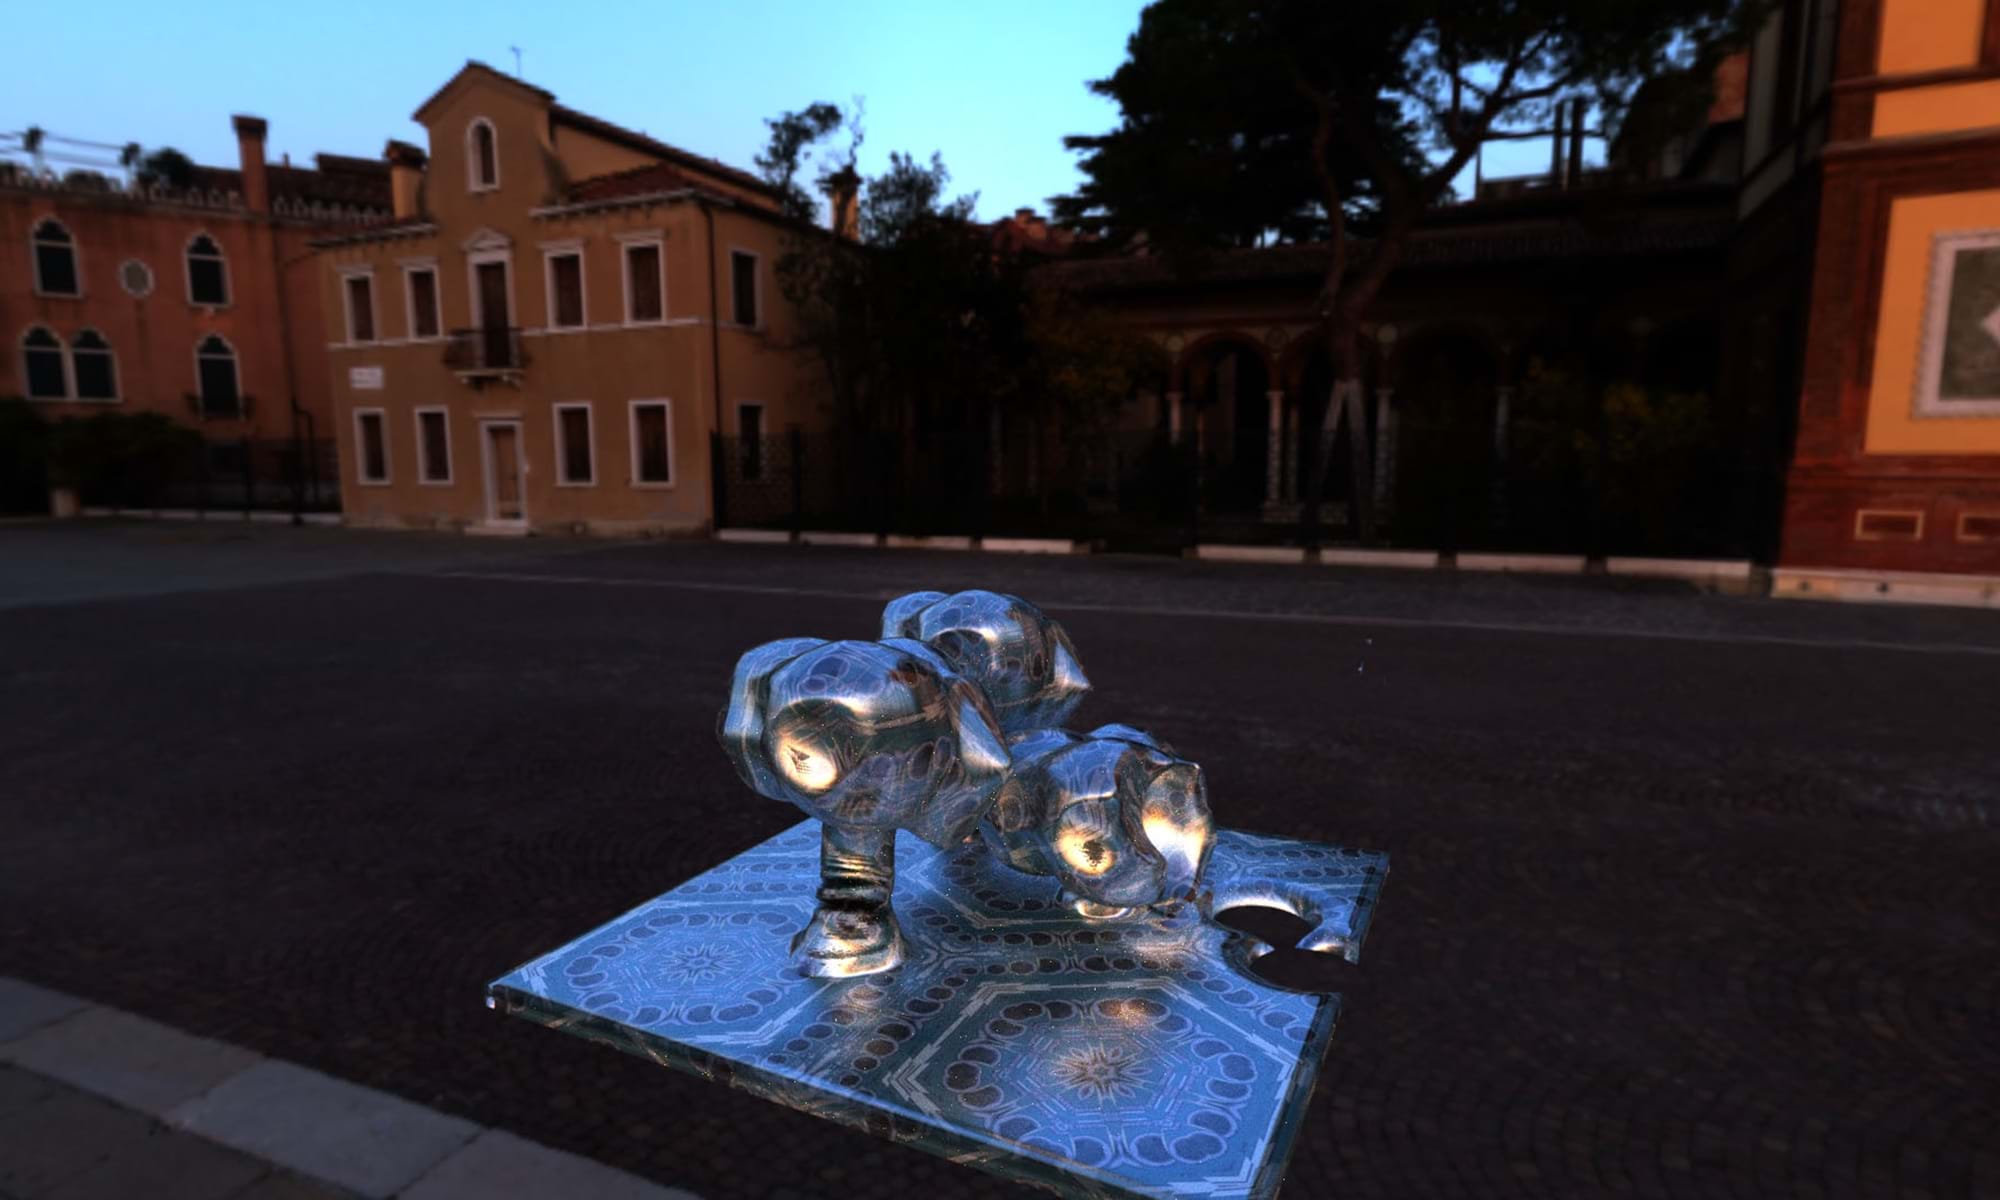 'Beyond Triangles: Sculpting with SDF Raymarching' is a 2023 Digital Graduate Show project by Alessandro Bason, a Computer Games Technology student at Abertay University.